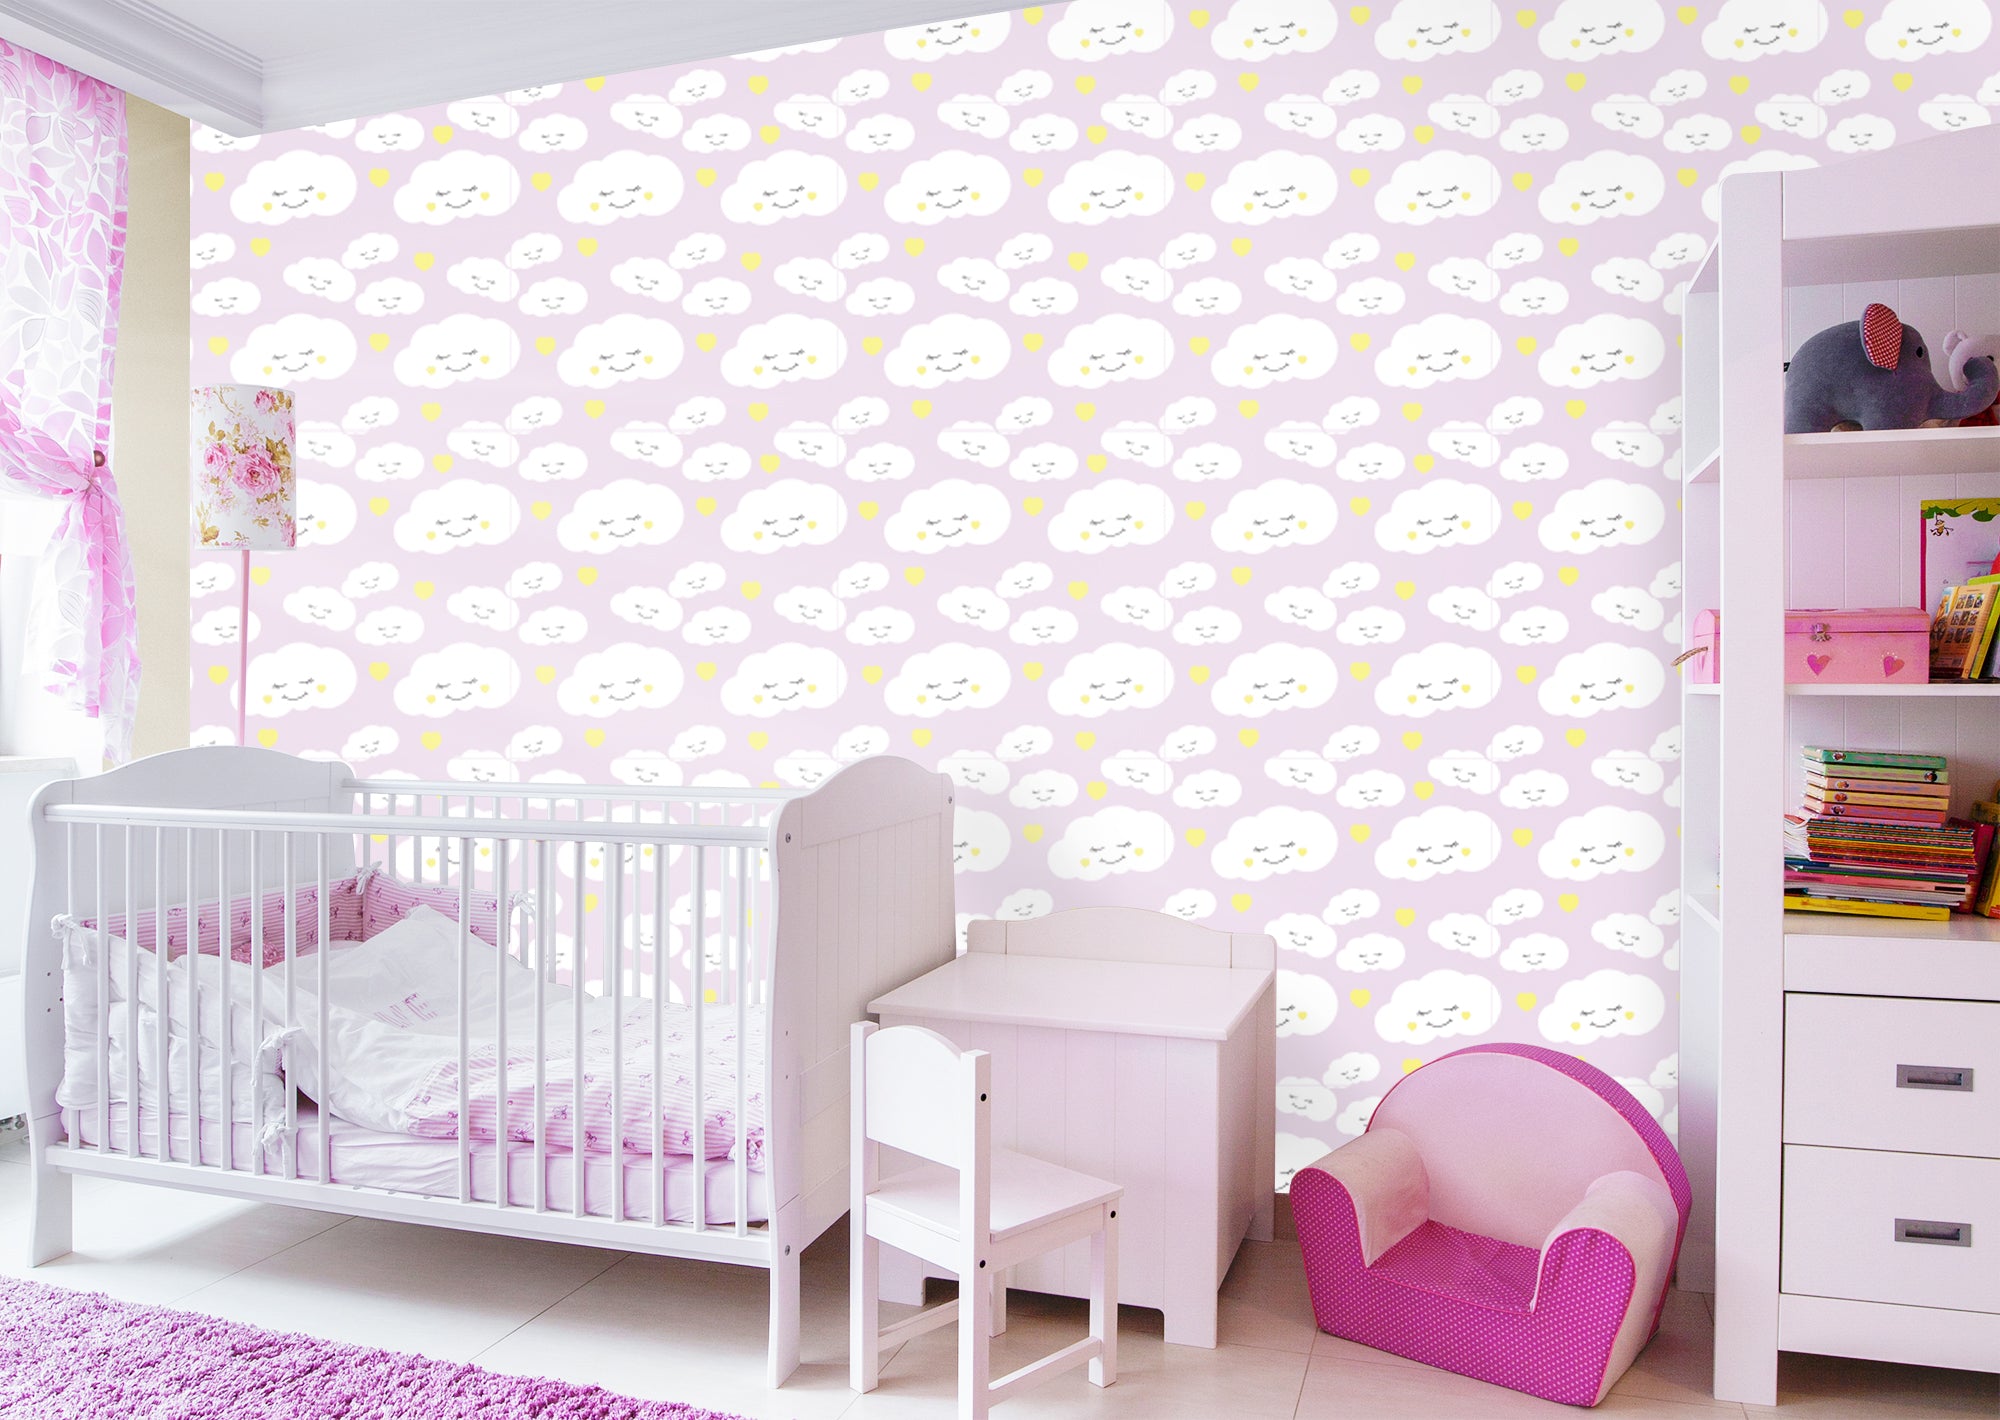 For Crying Out Cloud - Removable Peel & Stick Wallpaper 24" x 12.5 (25 sf) by Fathead